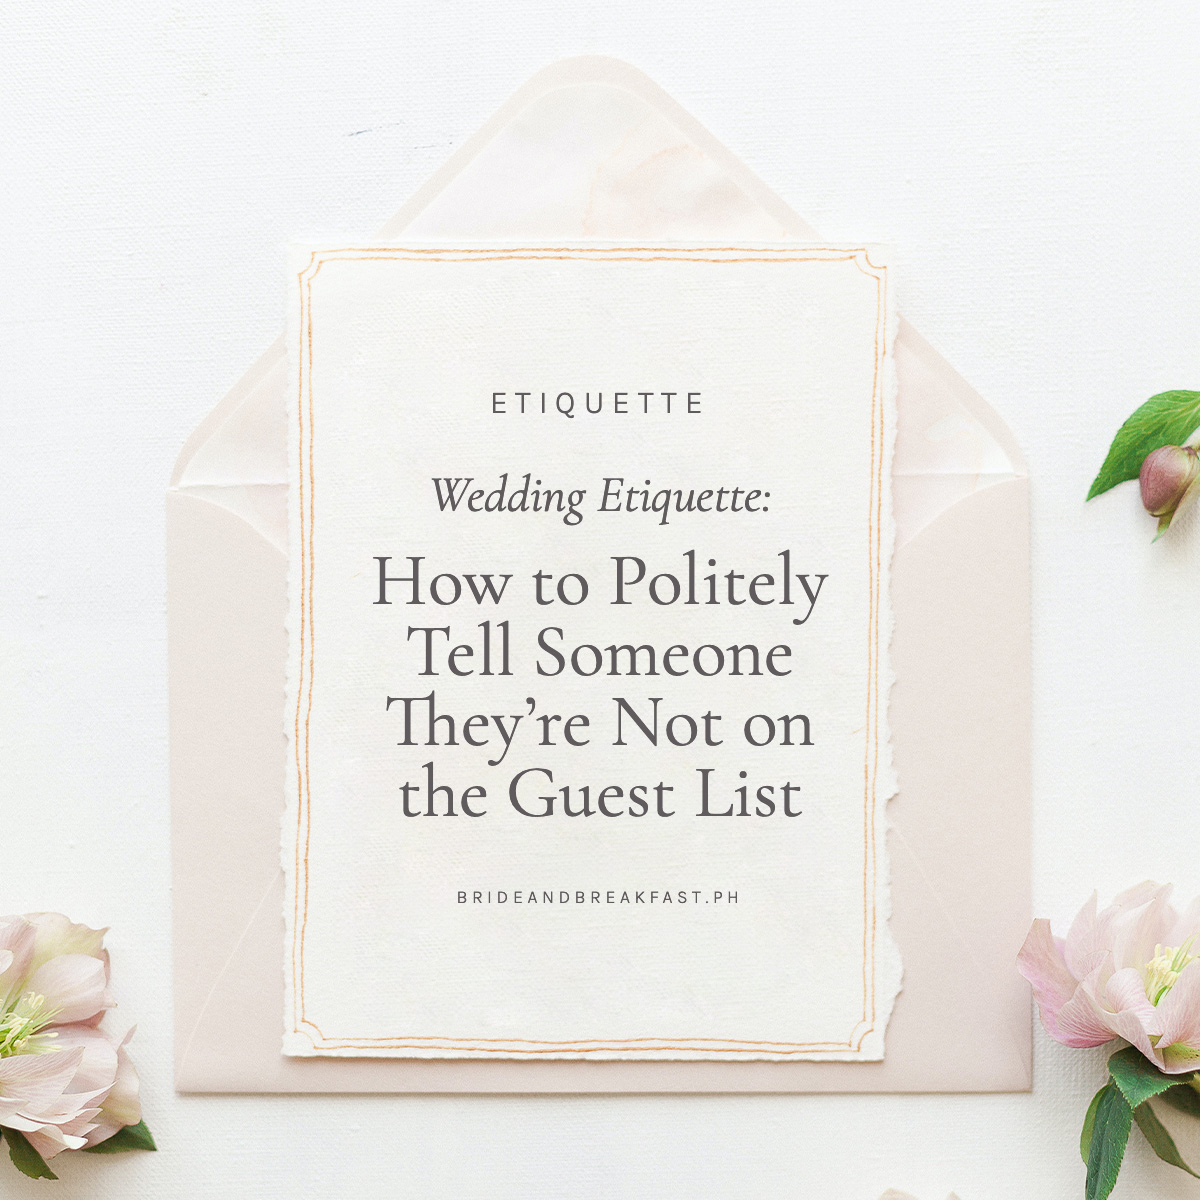 Wedding Etiquette: How to Politely Tell Someone They're Not on the Guest List